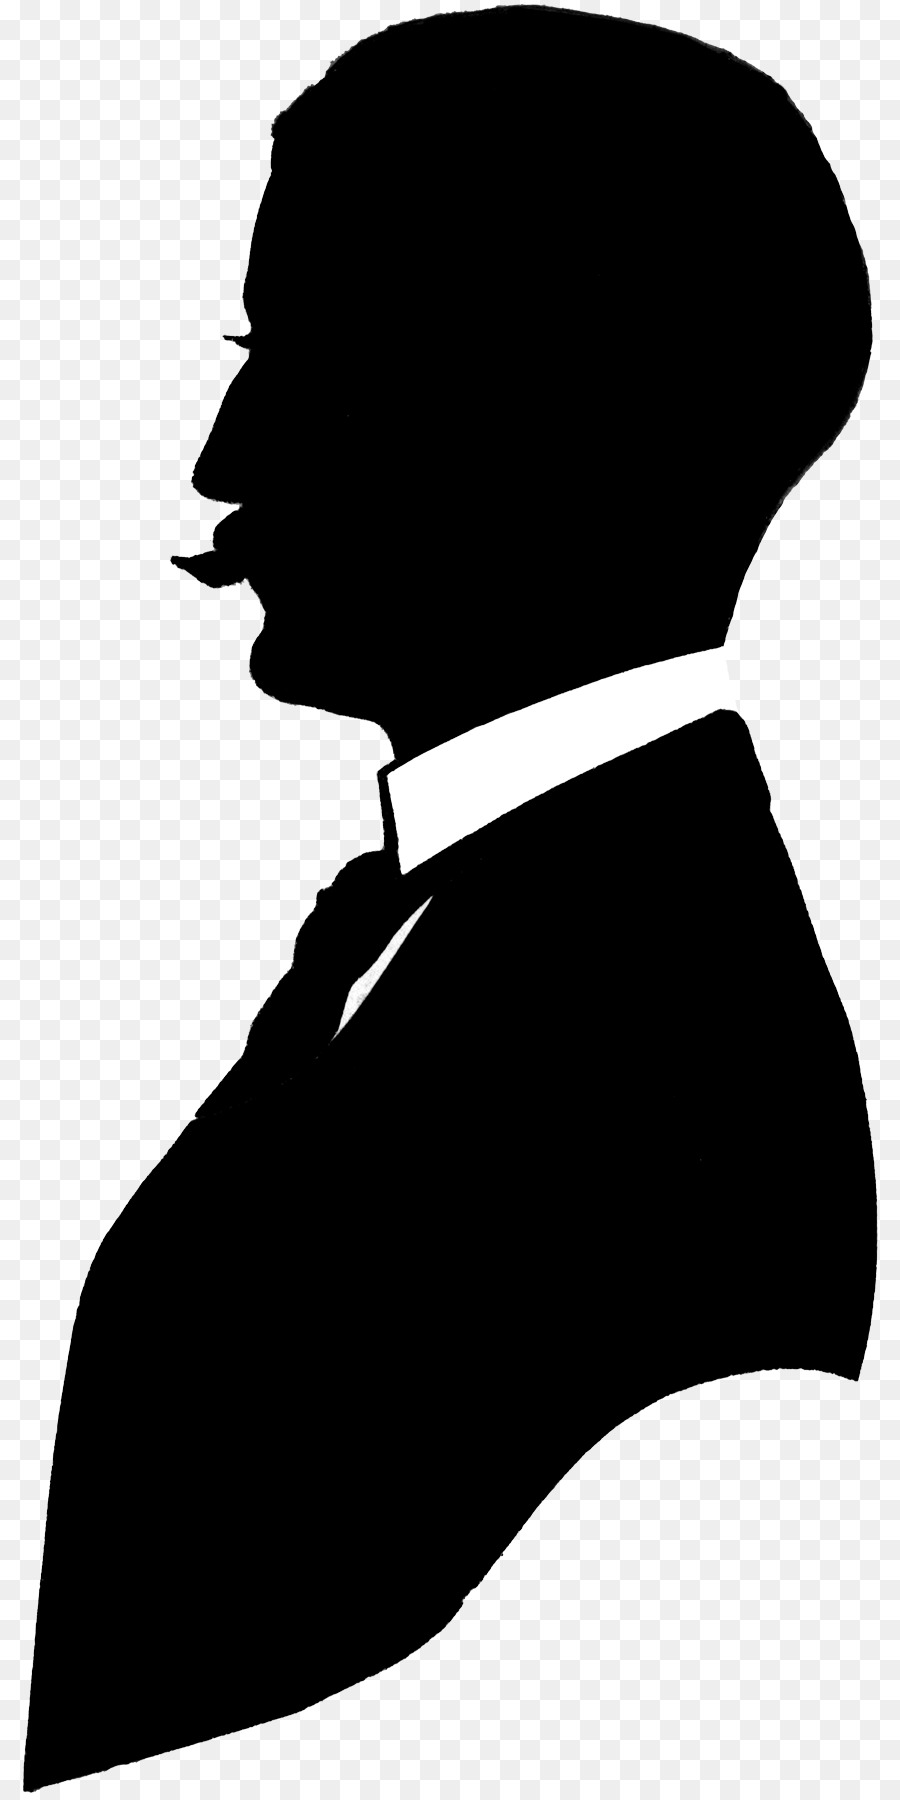 Monochrome photography Black and white Silhouette - gentleman png download - 869*1800 - Free Transparent Monochrome Photography png Download.